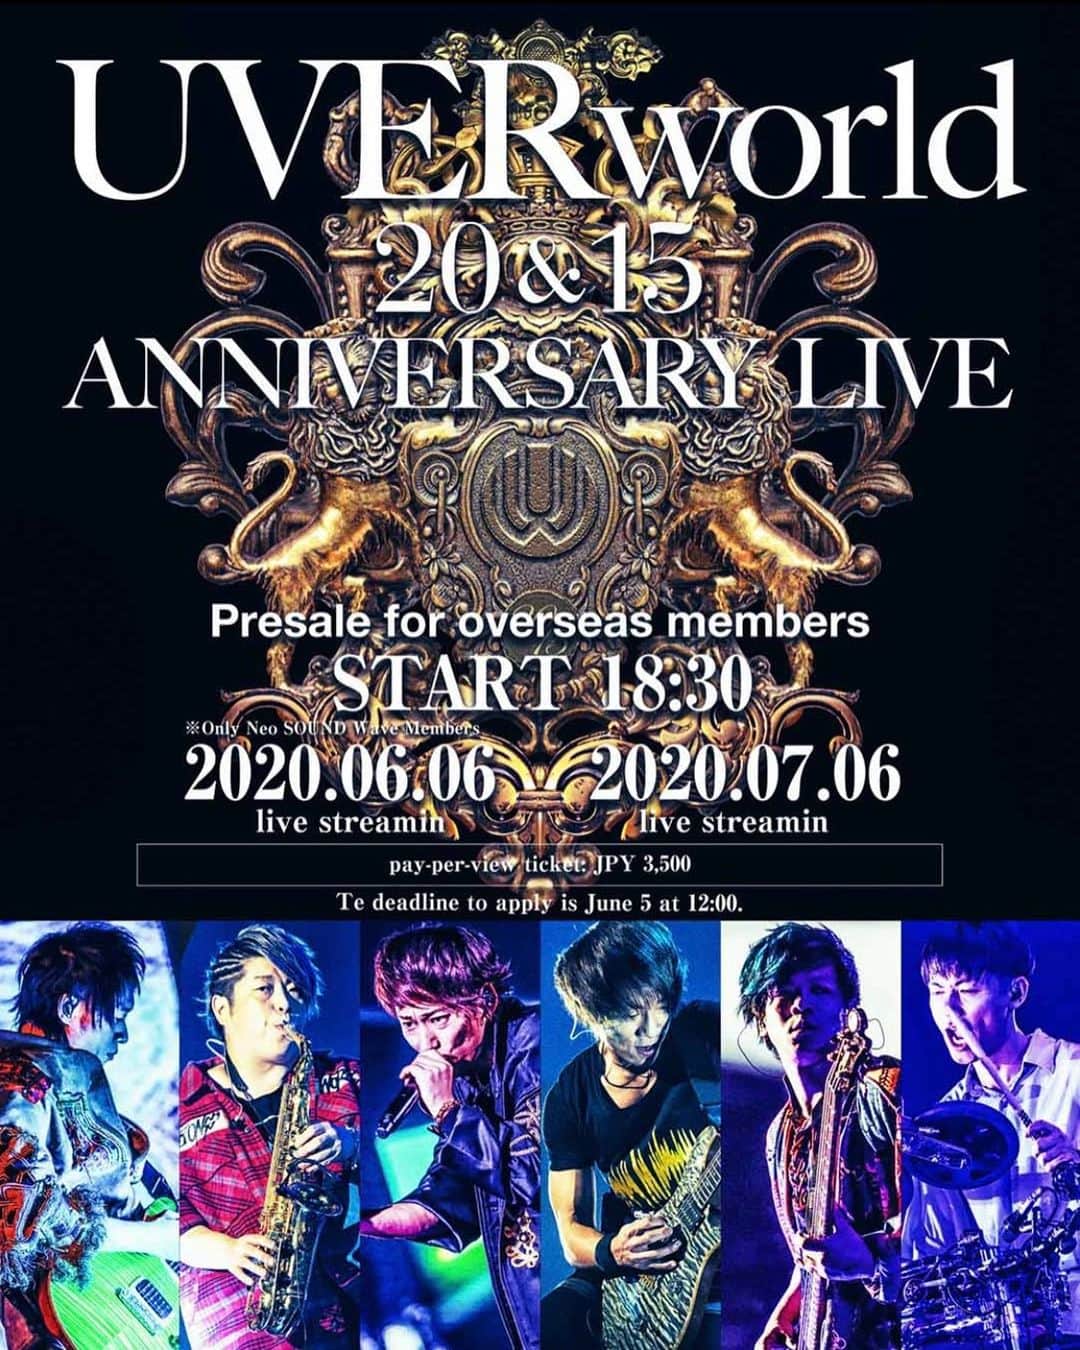 UVERworld【公式】さんのインスタグラム写真 - (UVERworld【公式】Instagram)「UVERworld 20&15 ANNIVERSARY LIVE ﻿ International Fan Club Member Ticket Office﻿ ﻿ Thank you for your patience.﻿ We are now ready to accept livestream concert ticket purchases for overseas members.﻿ ﻿ These Show is Livestream.﻿ ﻿ ■Livestream Schedule﻿ June 6, 2020 - 18:30﻿ July 6, 2020 - 18:30﻿ ﻿ ■Livestream Ticket (Ticket Cost)﻿ 3,500 JPY (tax incl.)﻿ ﻿ ■Purchase Period﻿ June 6 Concert (Fan Club Member-Exclusive)﻿ From June 4, 2020 (Thu) 12:00 ﻿ NN to June 5, 2020 (Fri) 12:00 NN﻿ ﻿ July 6 Concert (Fan Club Member Priority)﻿ From June 4, 2020 (Thu) 12:00 ﻿ NN to June 14, 2020 (Sun) 11:59 PM﻿ *General sales start at a later date﻿ (planned/may not be available)﻿ ﻿ 《Book Tickets Here》﻿ https://www.uverworld.jp/news/detail/1963﻿ ﻿ ﻿ [Precautions]﻿ *Please note that the livestream may be unavailable in some countries/regions such as China, Russia, and the Democratic People's Republic of Korea (North Korea).﻿ *This livestream will not leave an archive. (video and audio recordings will hold you legally liable)﻿ ﻿ This livestream uses PIA LIVE STREAM.﻿ ﻿ ■PIA LIVE STREAM﻿ https://t.pia.jp/pia/events/pialivestream/﻿ ﻿ We will be limiting the number of lines to ensure a pleasant experience for everyone. However, we will be using lines that can be comfortably viewed by a large number of people.  #uverworld  #uverworld拡がる  #internationalmember  #overseas #livestream」6月4日 14時00分 - uverworld_official